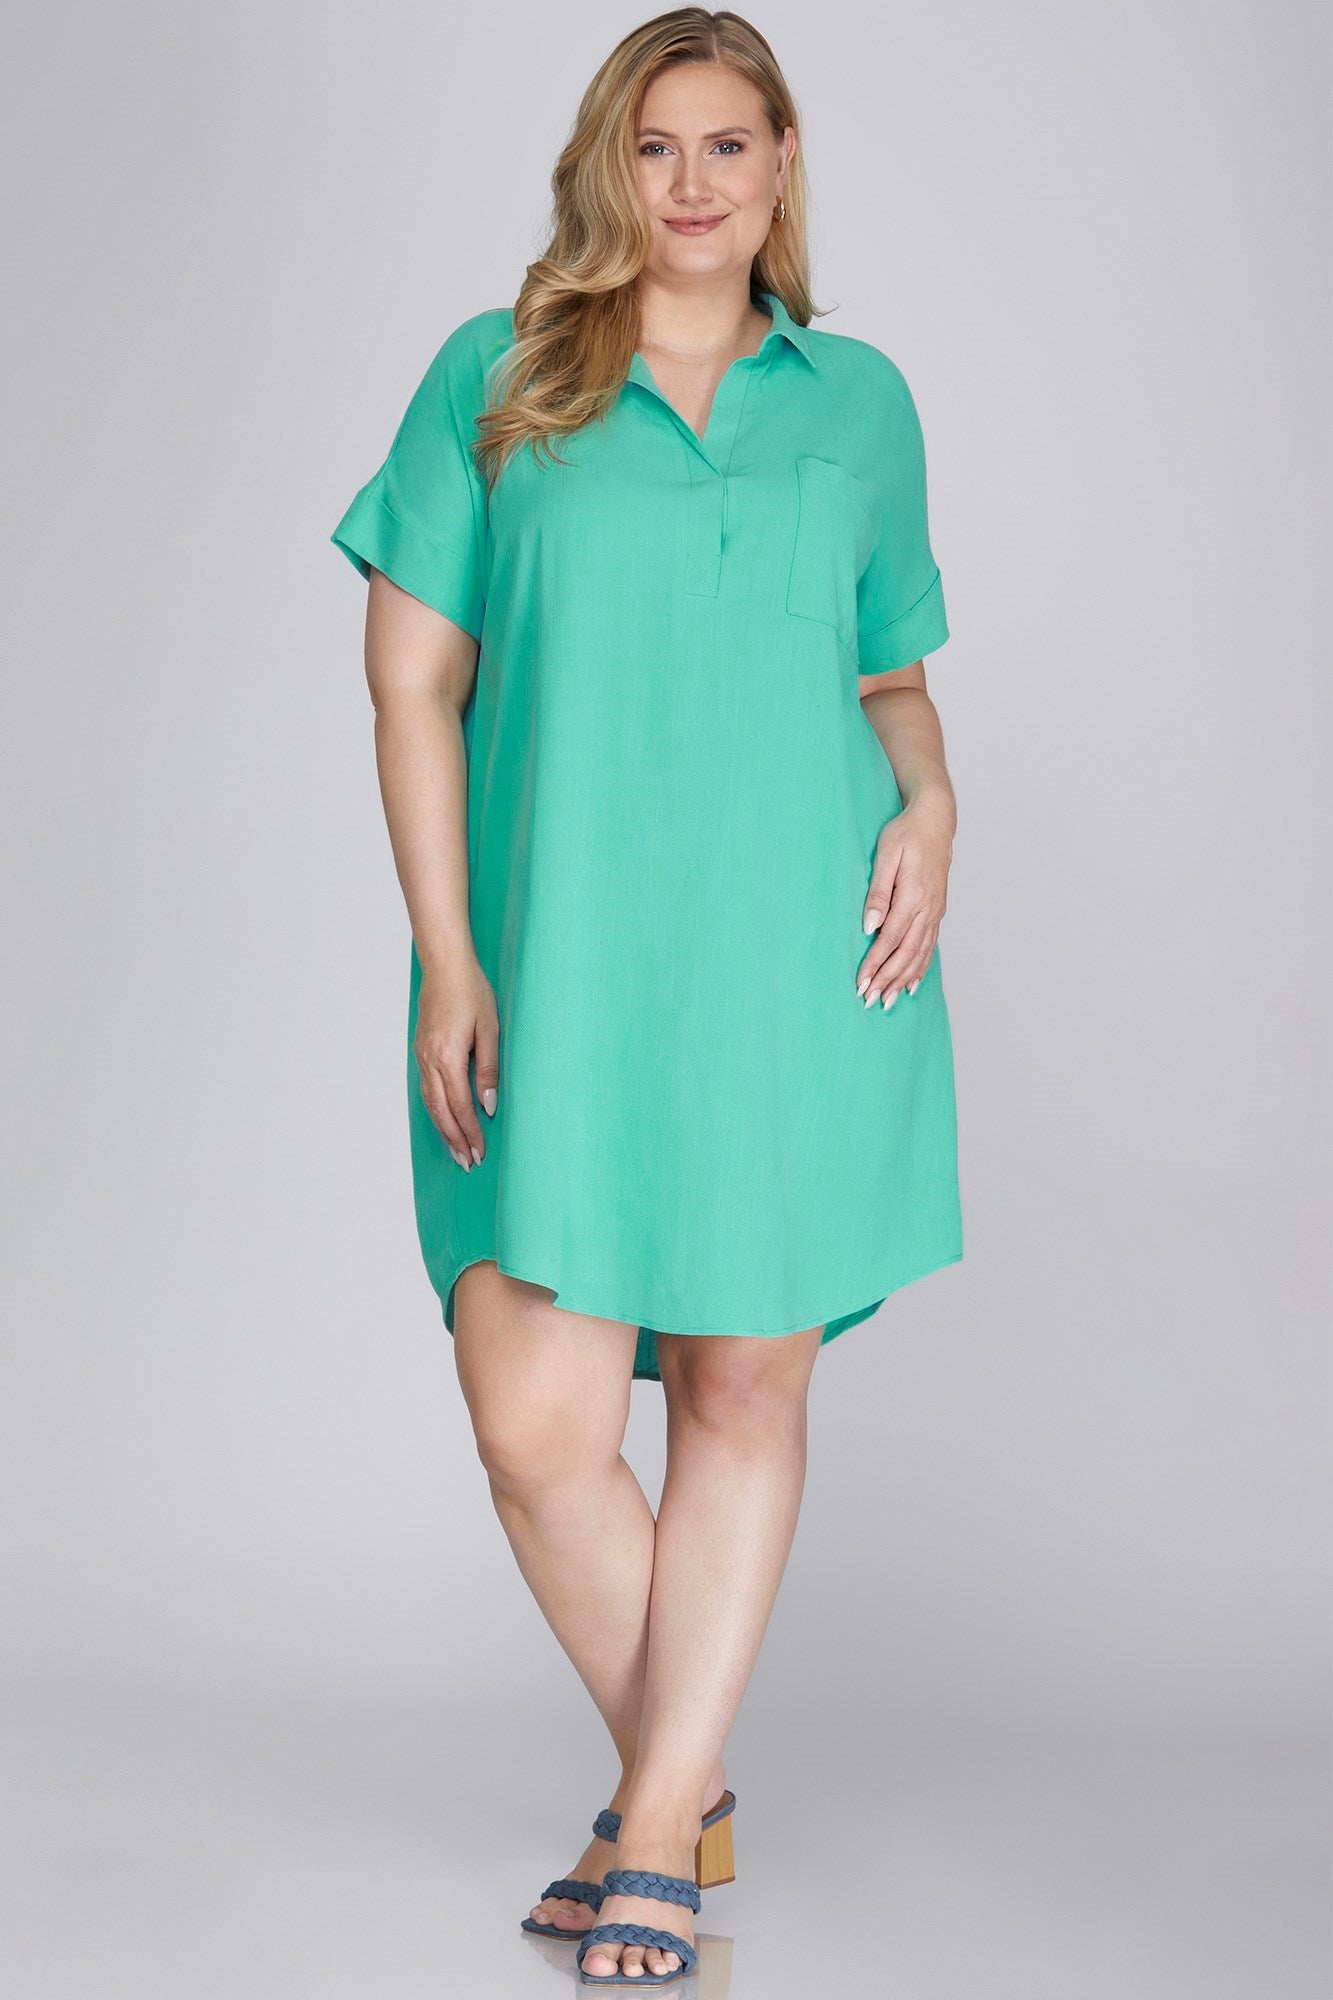 COLLARED DRESS WITH SIDE AND FRONT POCKETS